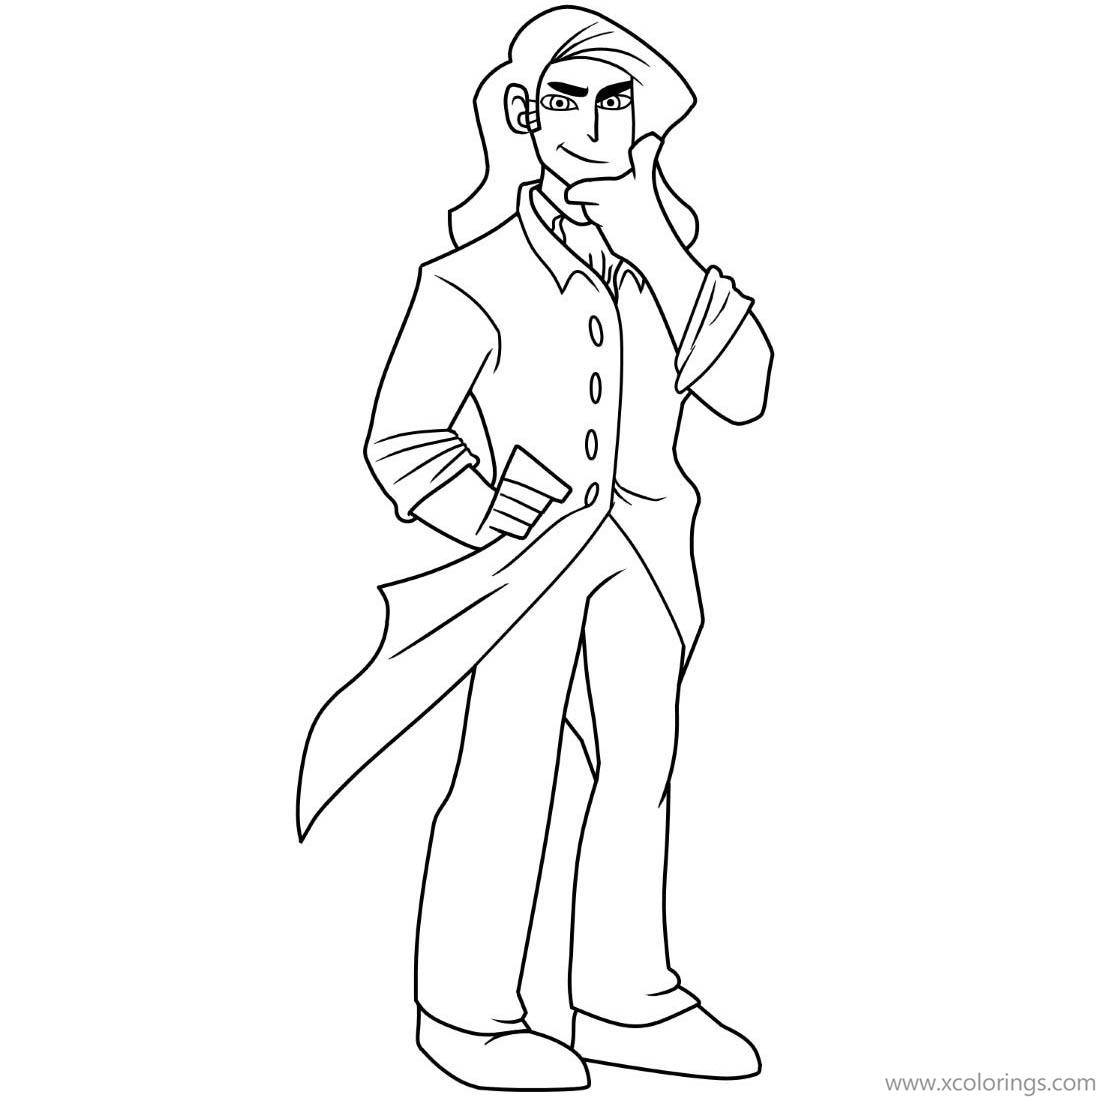 Free Stardew Valley Villagers Coloring Pages Elliott printable